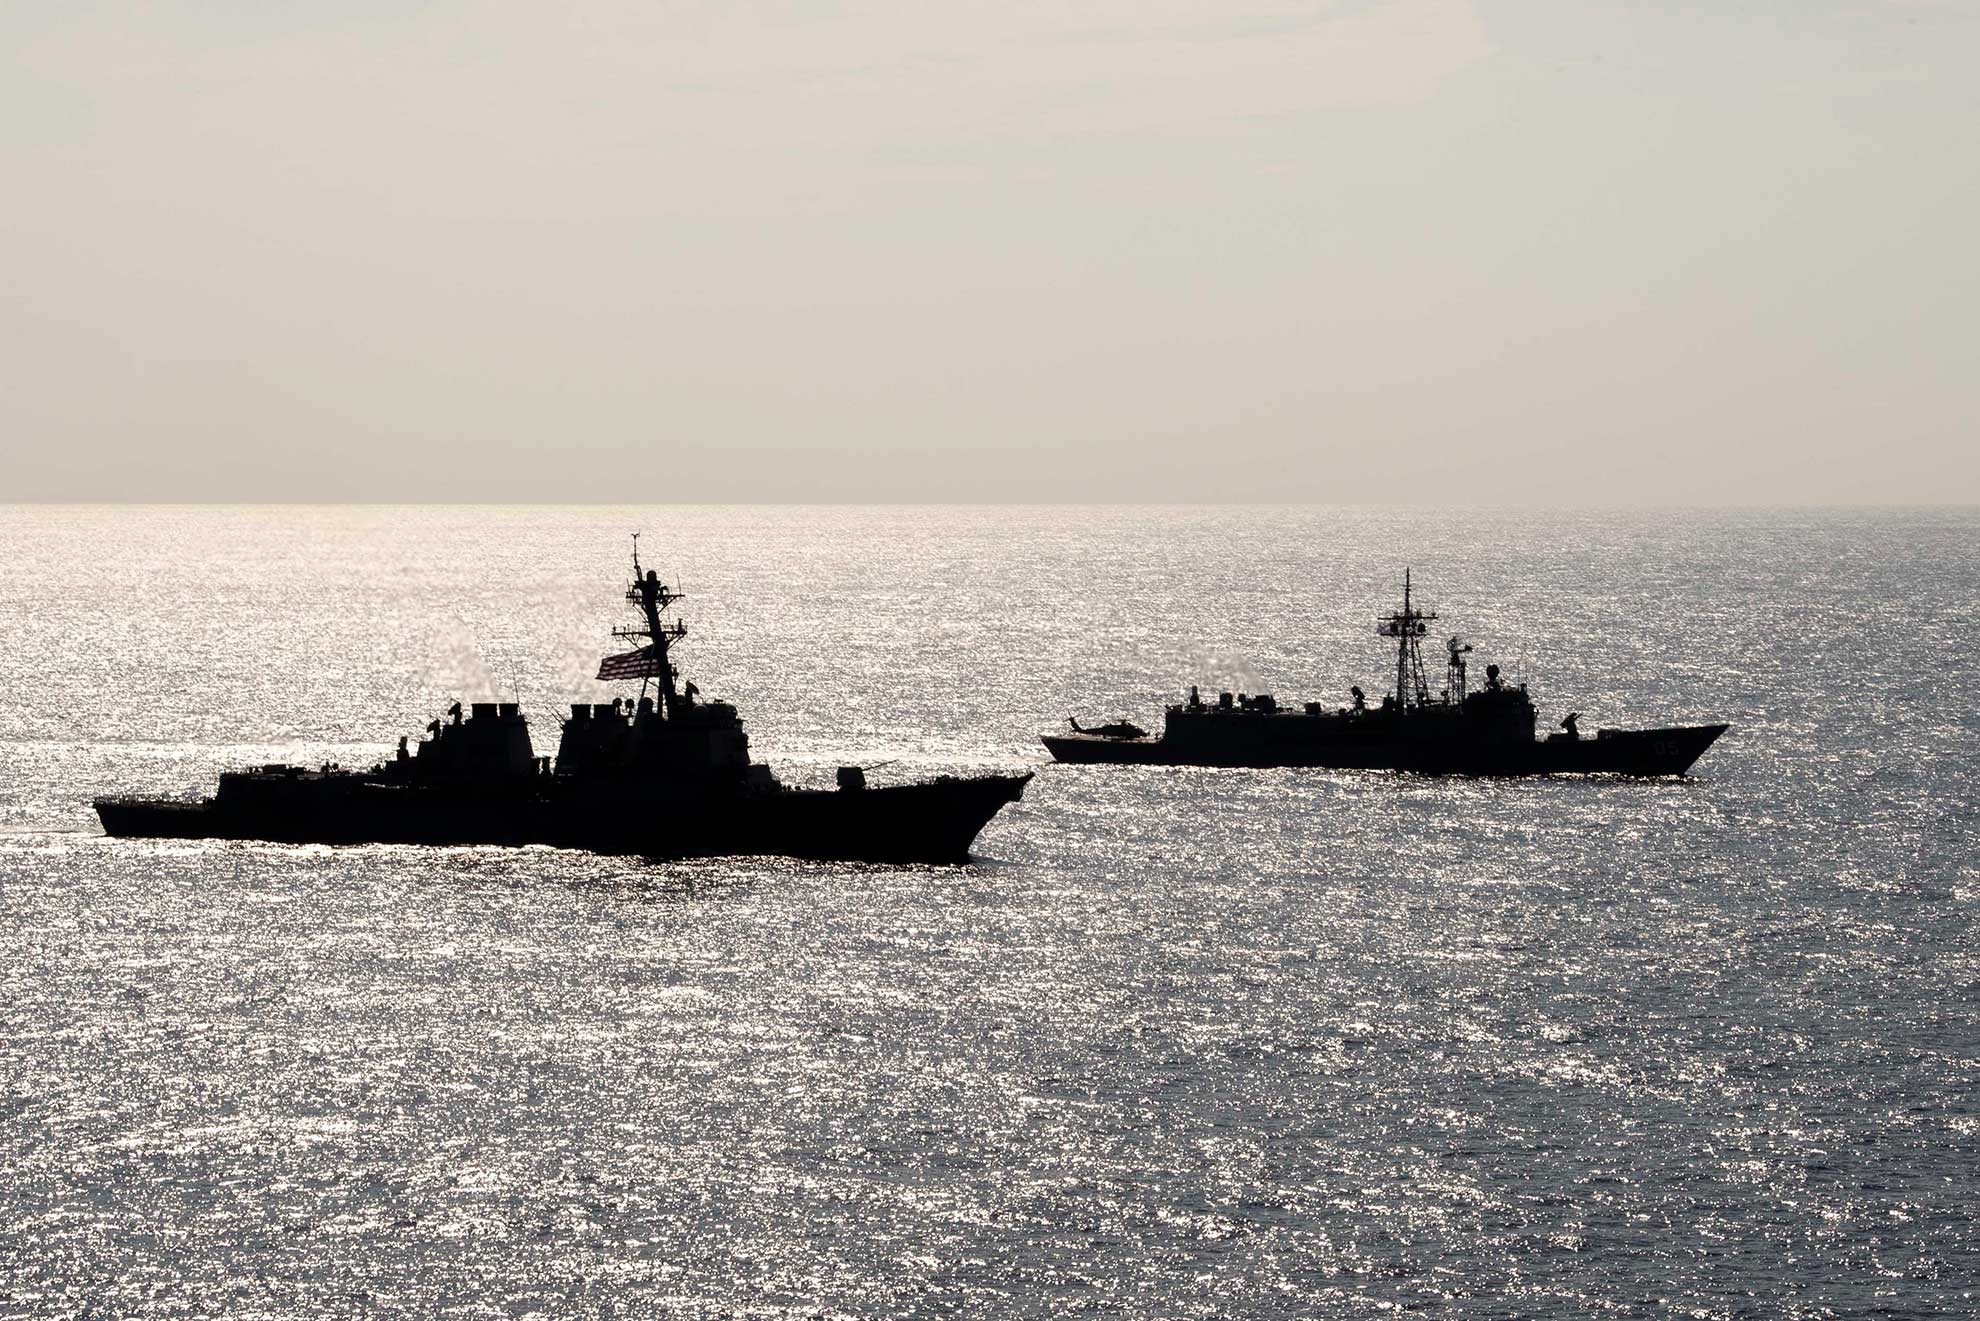 Philippine Sea (April 18, 2019) The Arleigh Burke-class guided-missile destroyer USS Preble (DDG 88) and the Royal Australian Navy Adelaide-class guided-missile frigate HMAS Melbourne (FFG 05) transit in formation during a cooperative deployment. Preble and Melbourne are participating in a cooperative deployment in order to improve on maritime capabilities between partners. Preble is deployed to the U.S 7th Fleet area of operations in support of security and stability in the Indo-Pacific region -- U.S. Navy photo by MCS 1st Class Bryan Niegel. -